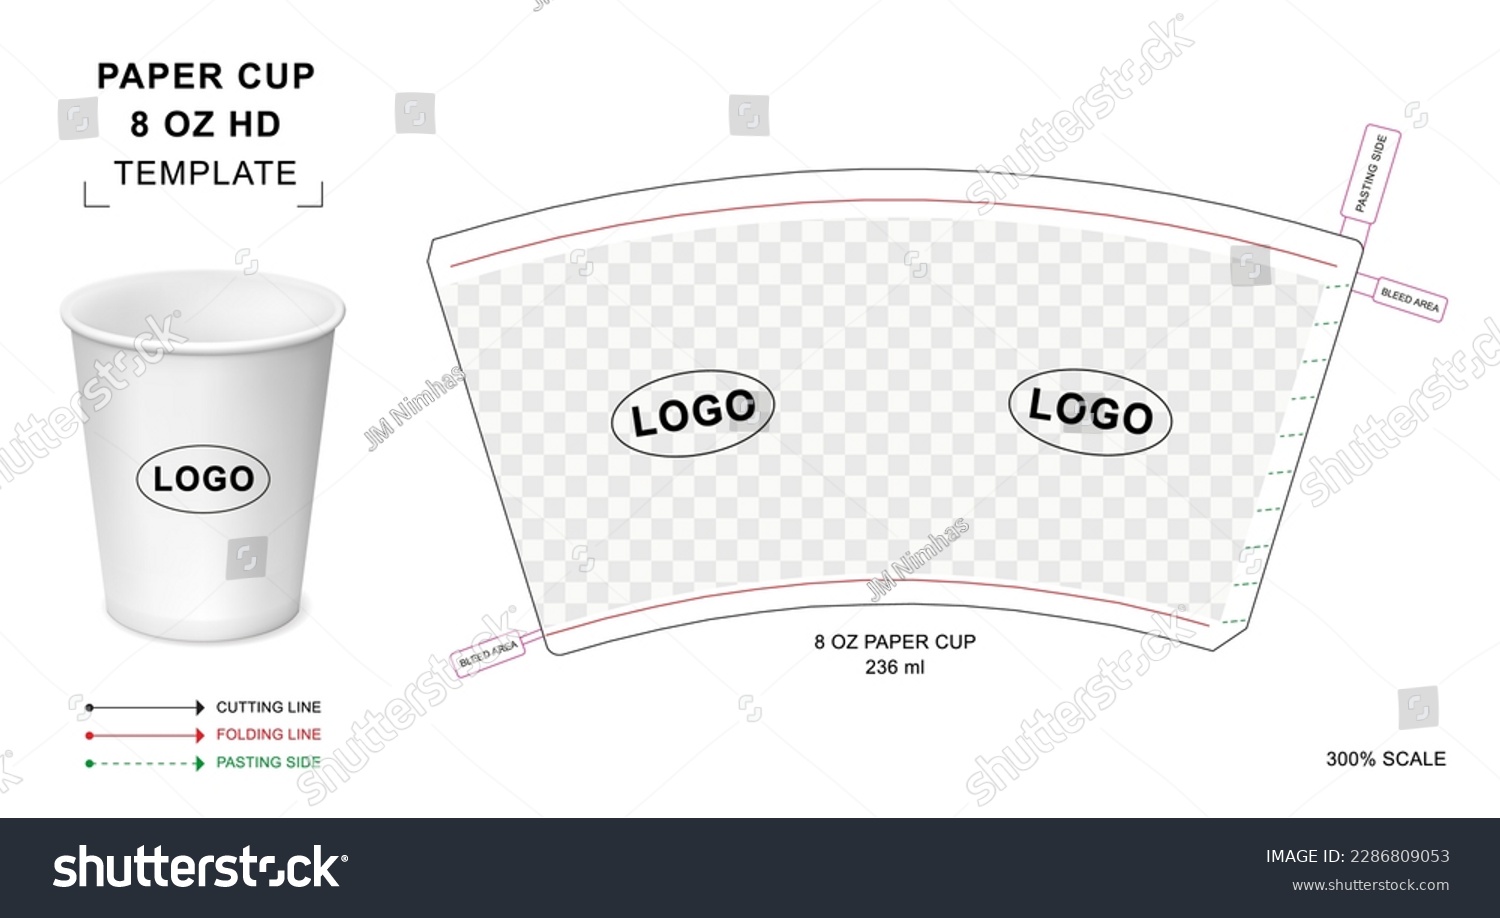 SVG of Paper cup die cut template for 8 oz HD svg